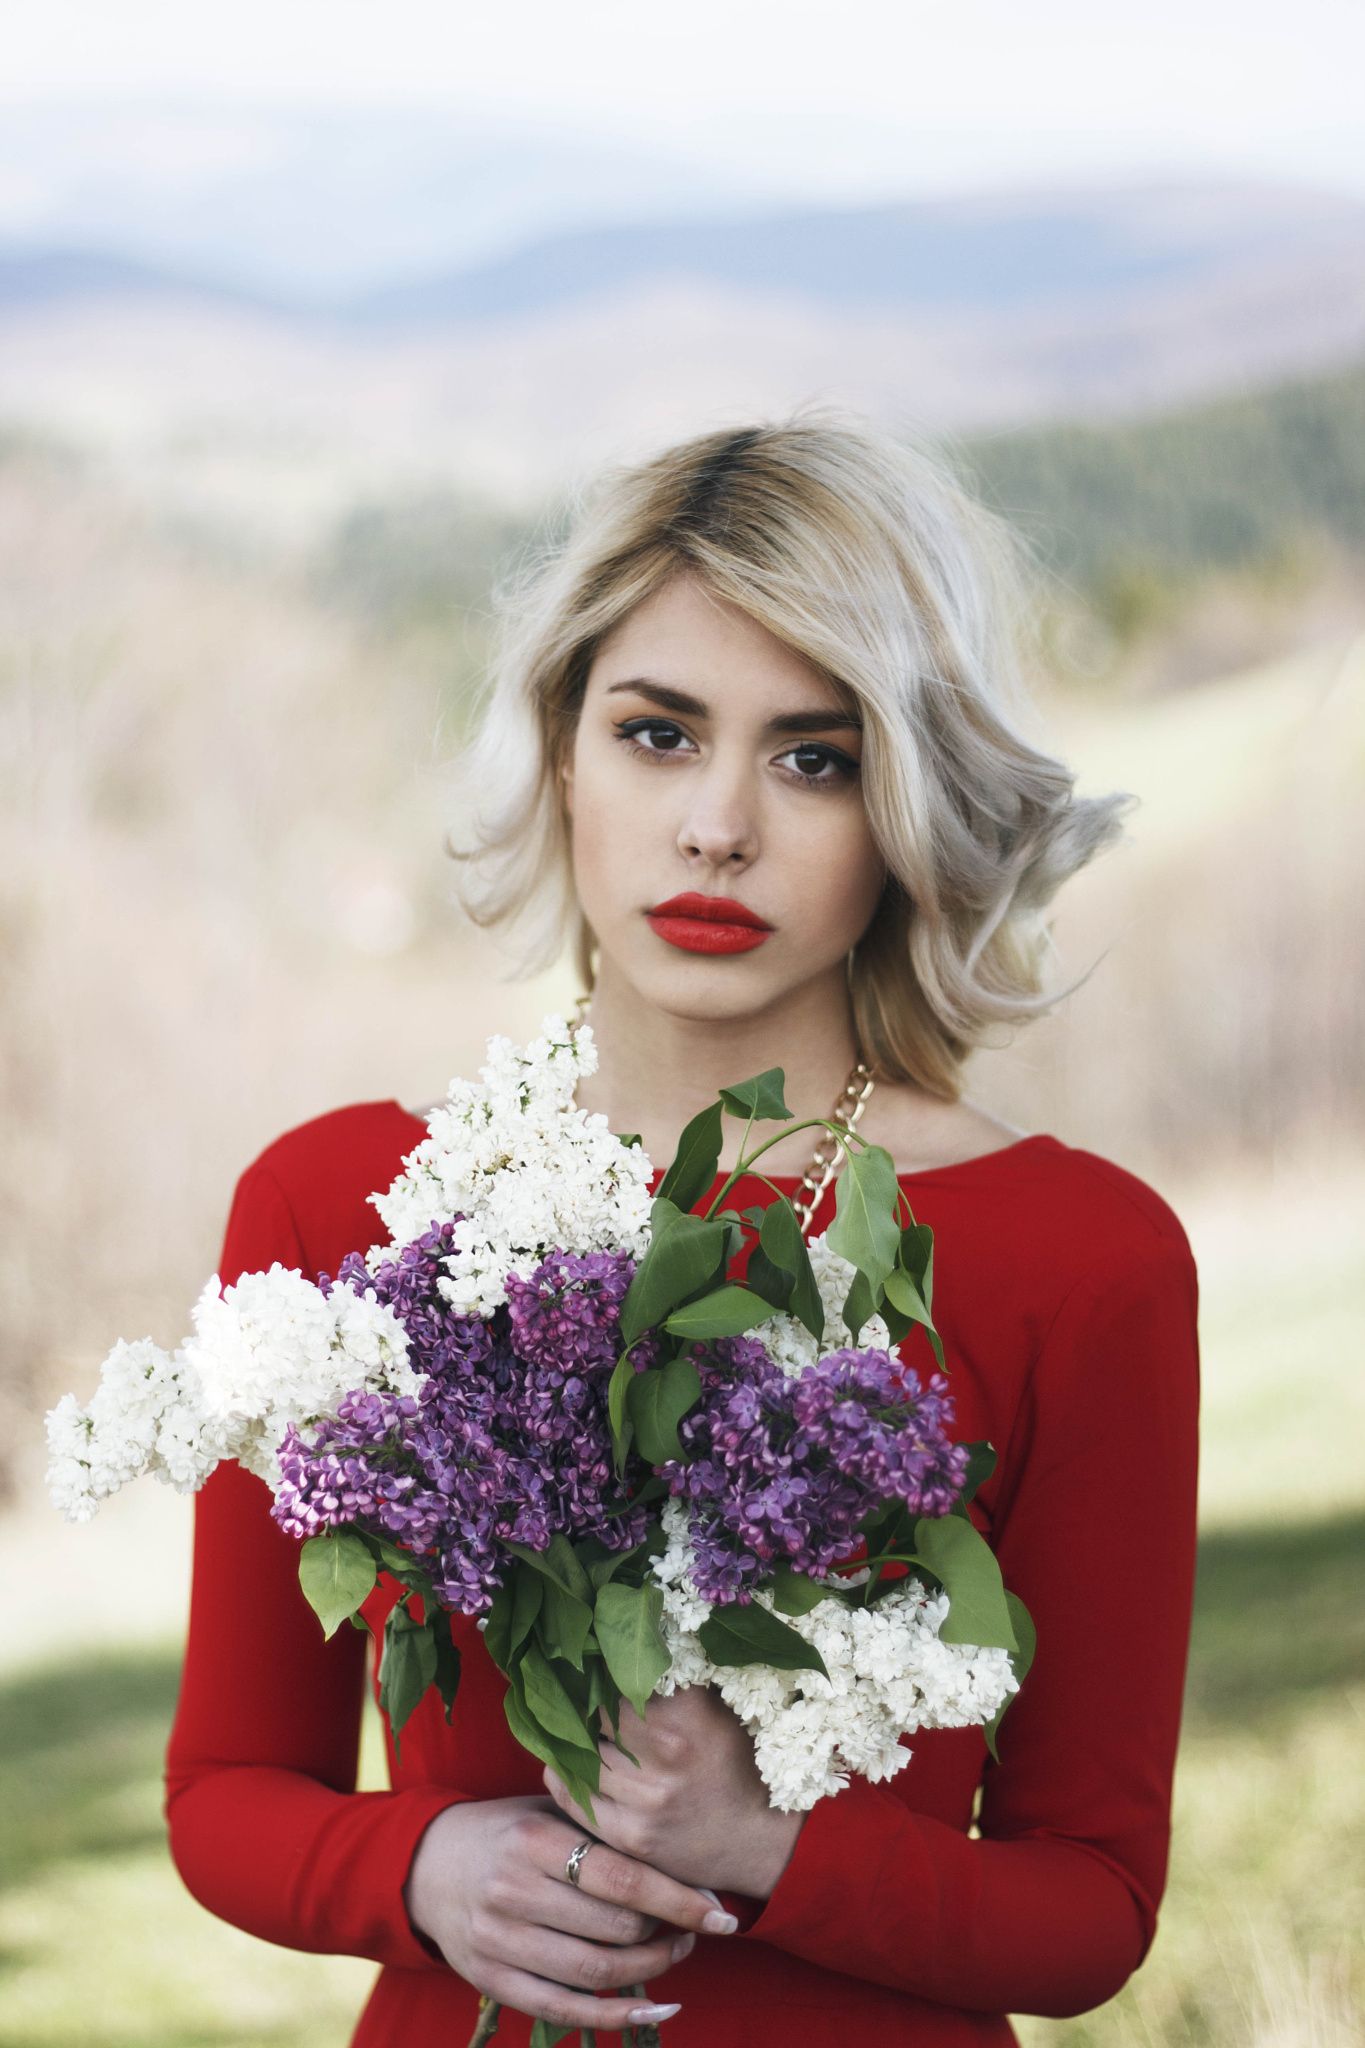 Girl and flowers - Girl holding flower bouquet. | Lilacs | Pinterest ...